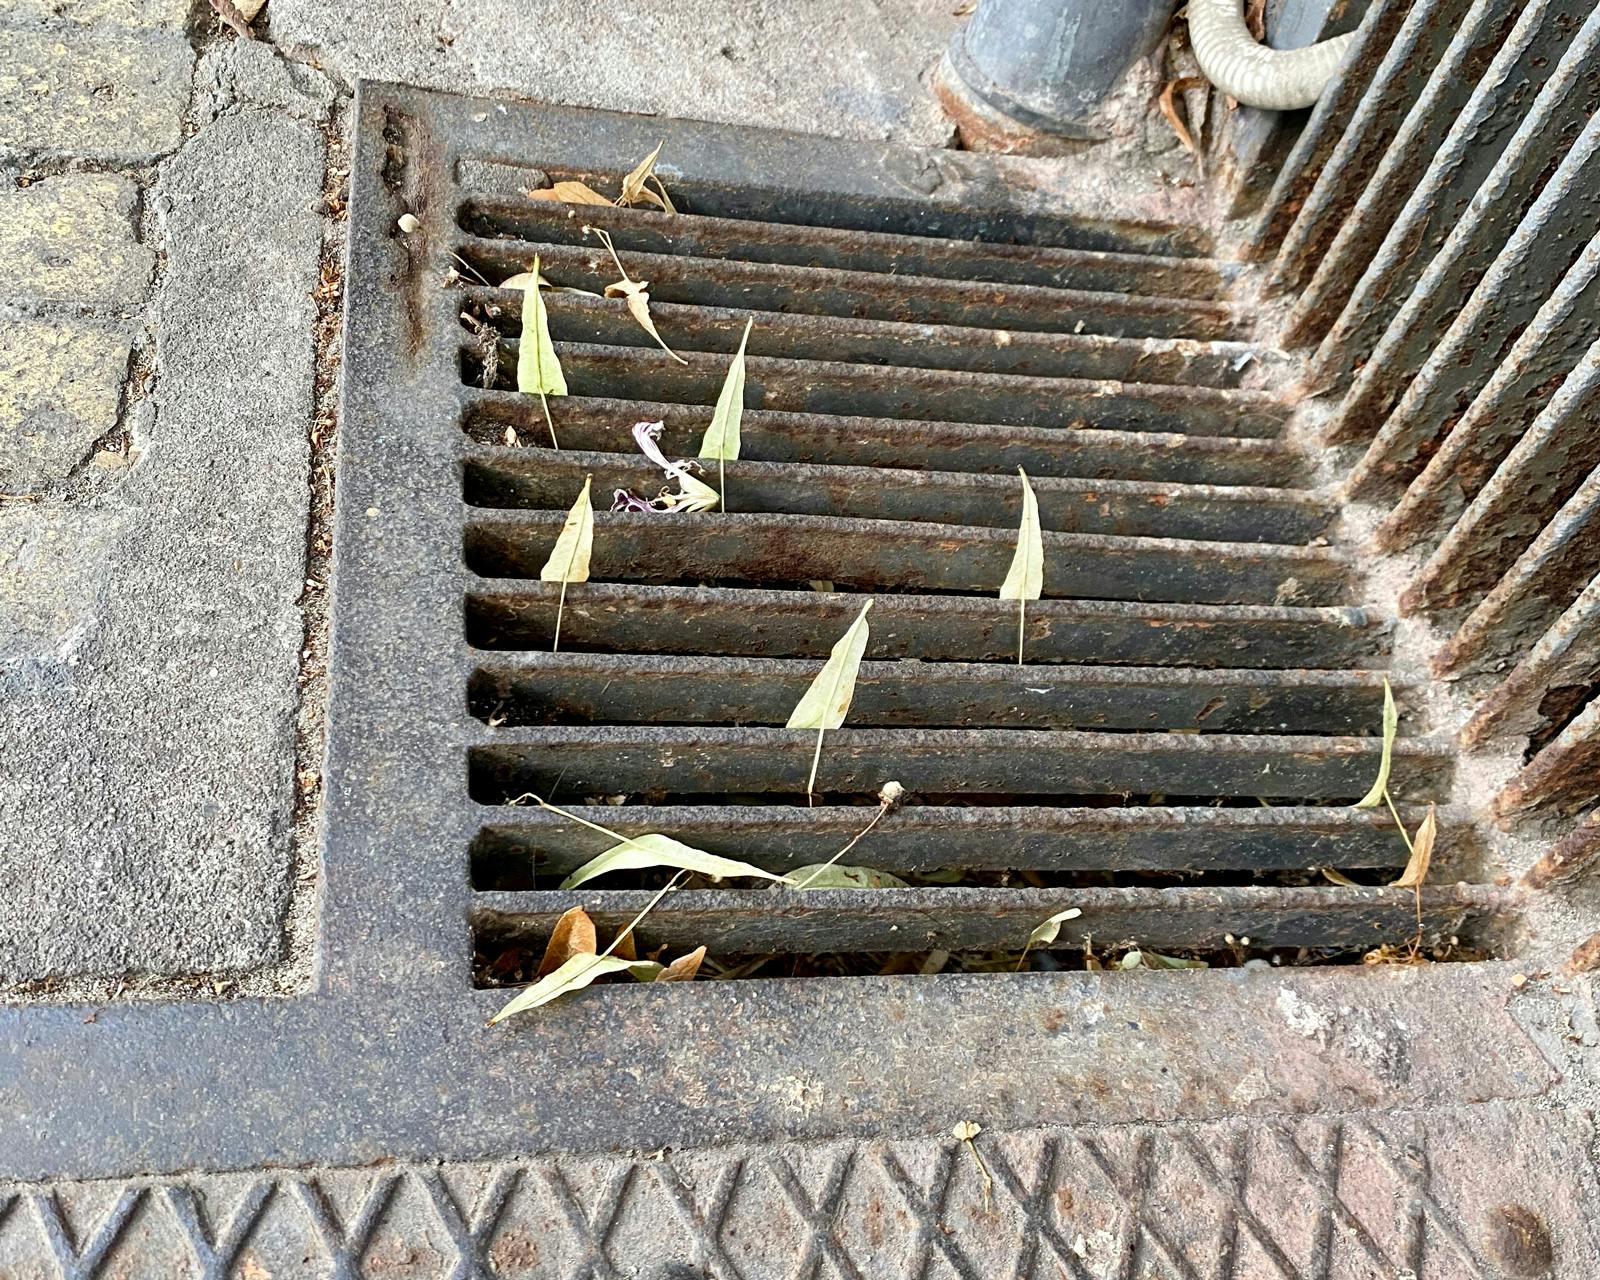 Usually we’re encouraged to look up, but looking down can be just as rewarding. Here I noticed that some very triangular leaves had been sucked into a street drain in such a way that they all had their stalks down and were standing vertical, resembling tiny trees.